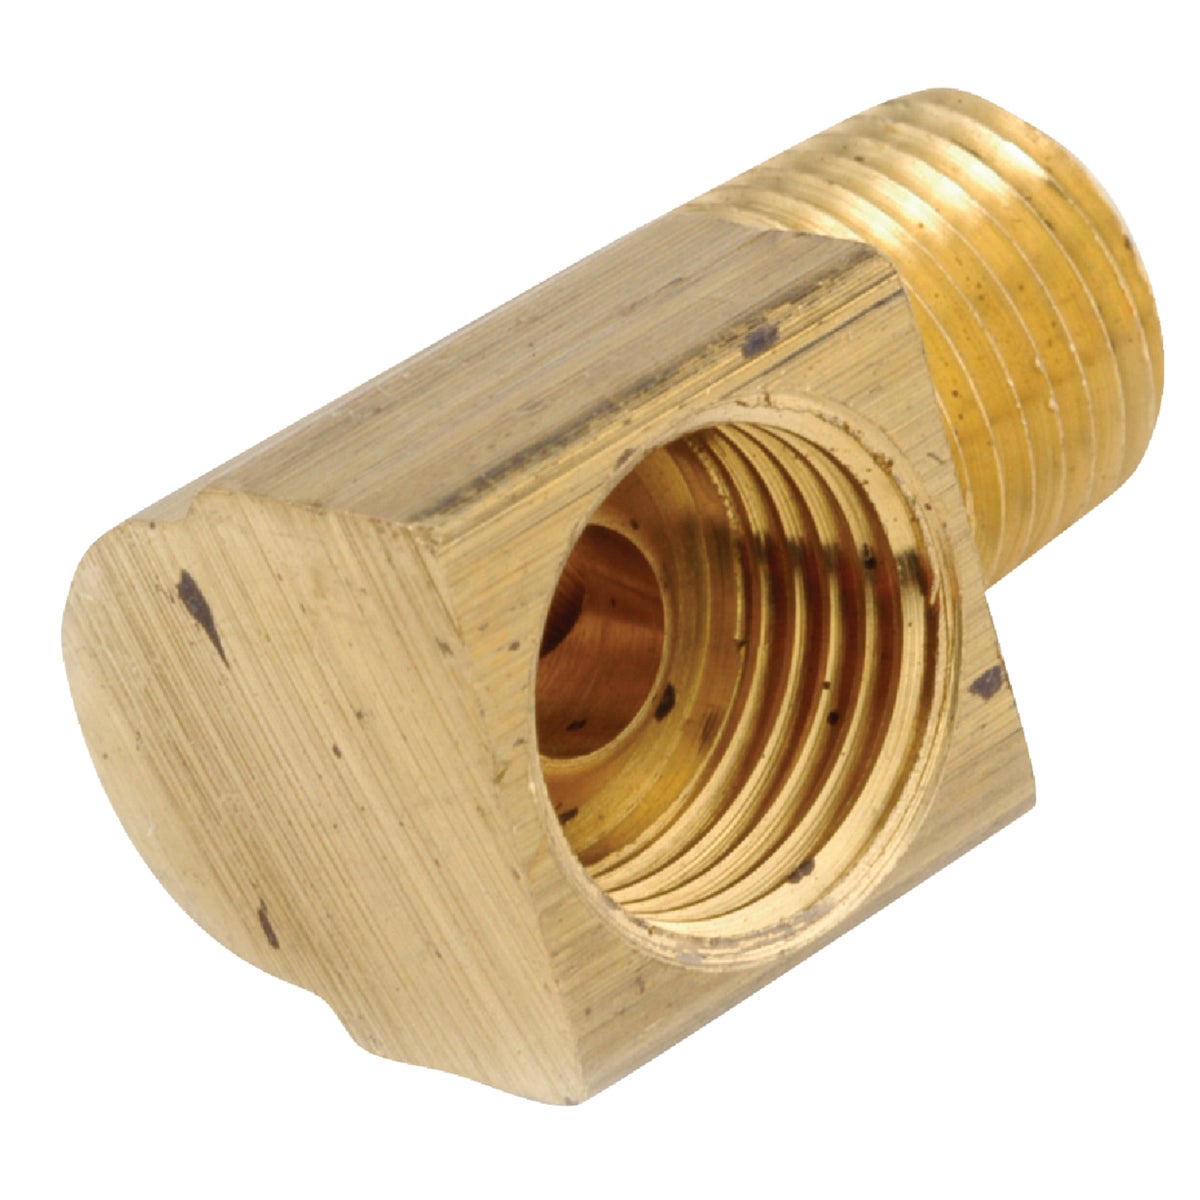 Item 442526, Brass O.D. tube size x Male pipe.